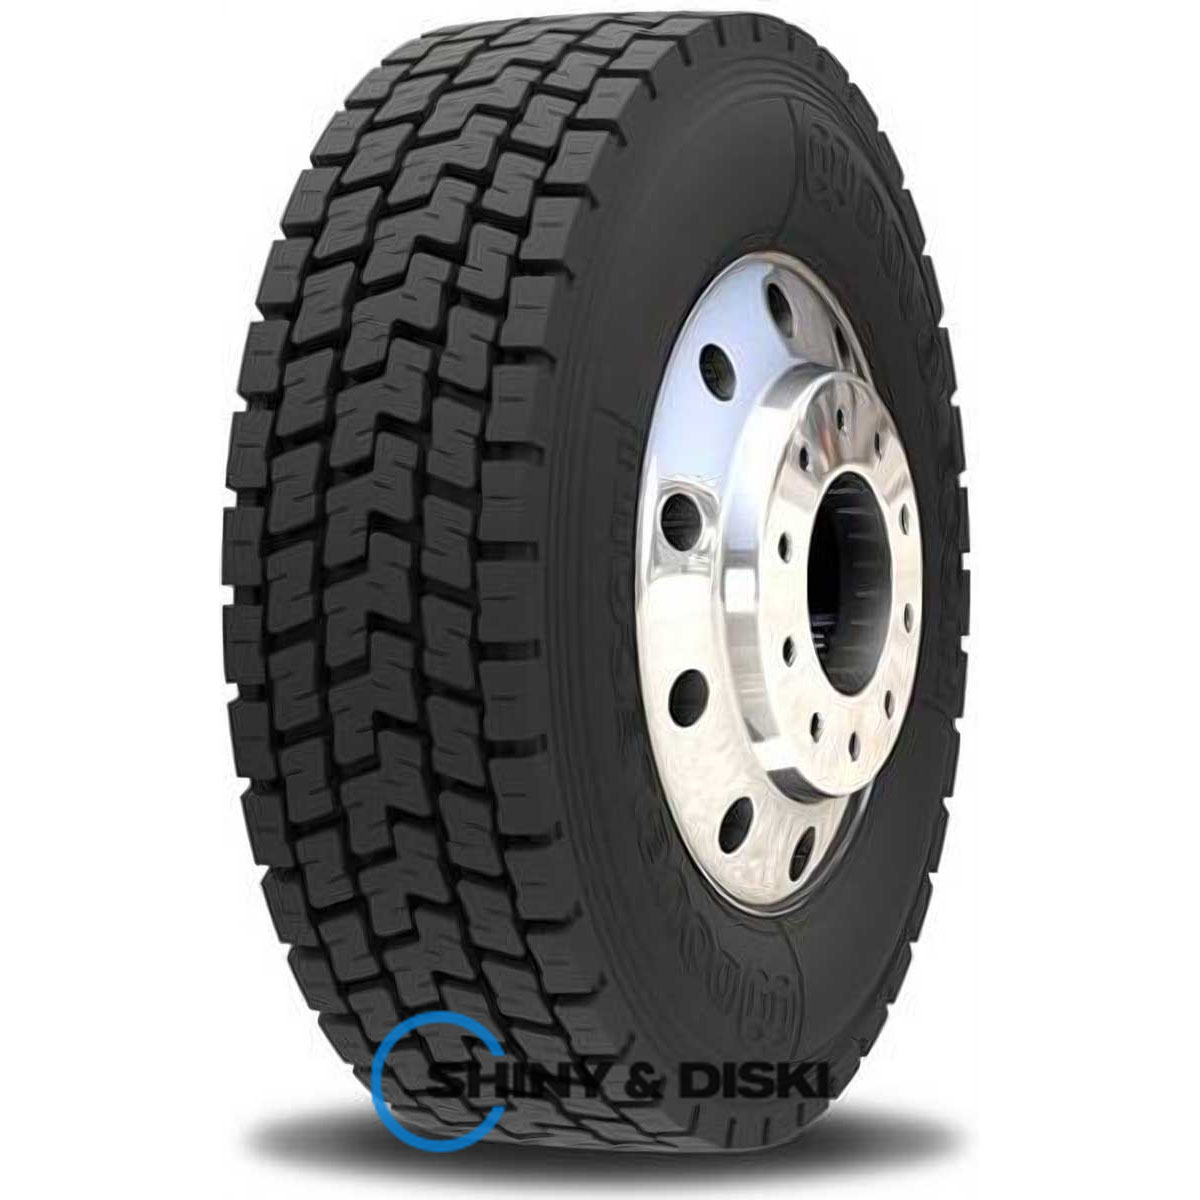 double coin rlb450 (ведущая ось) 295/80 r22.5 152/148m